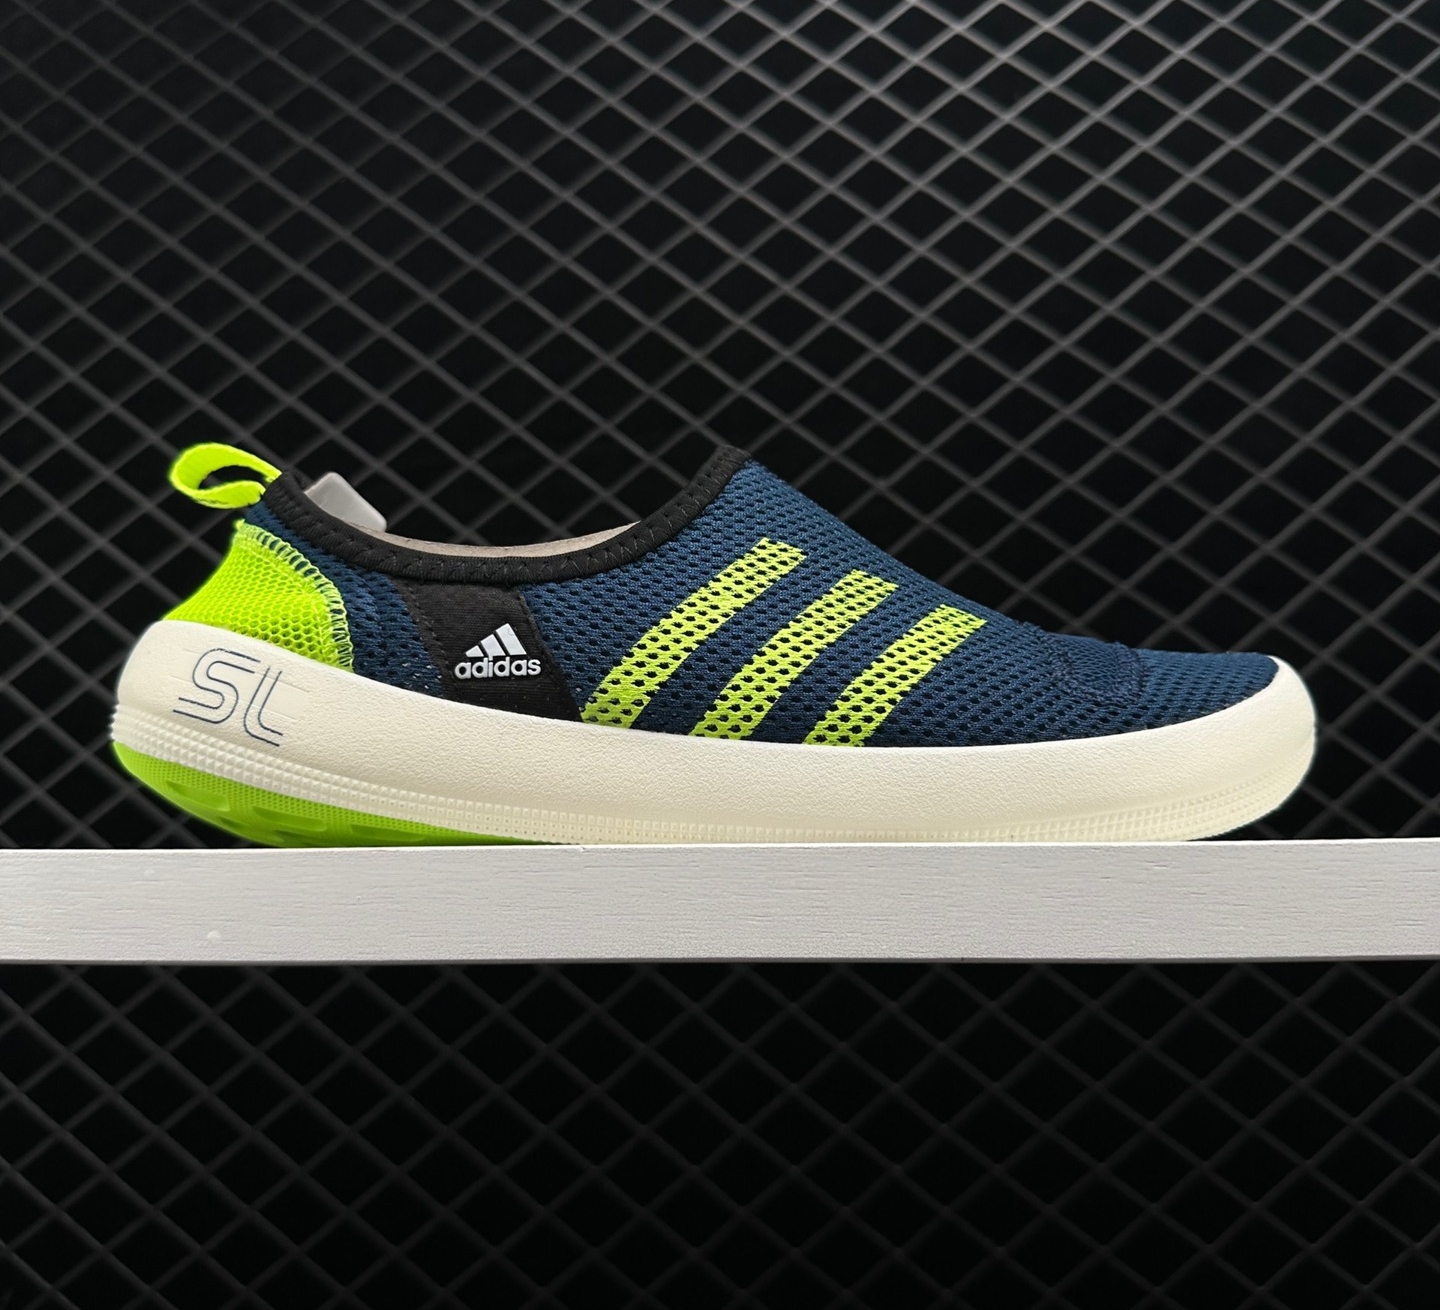 Adidas Climacool Boat SL Navy Green - Lightweight and Breathable Footwear